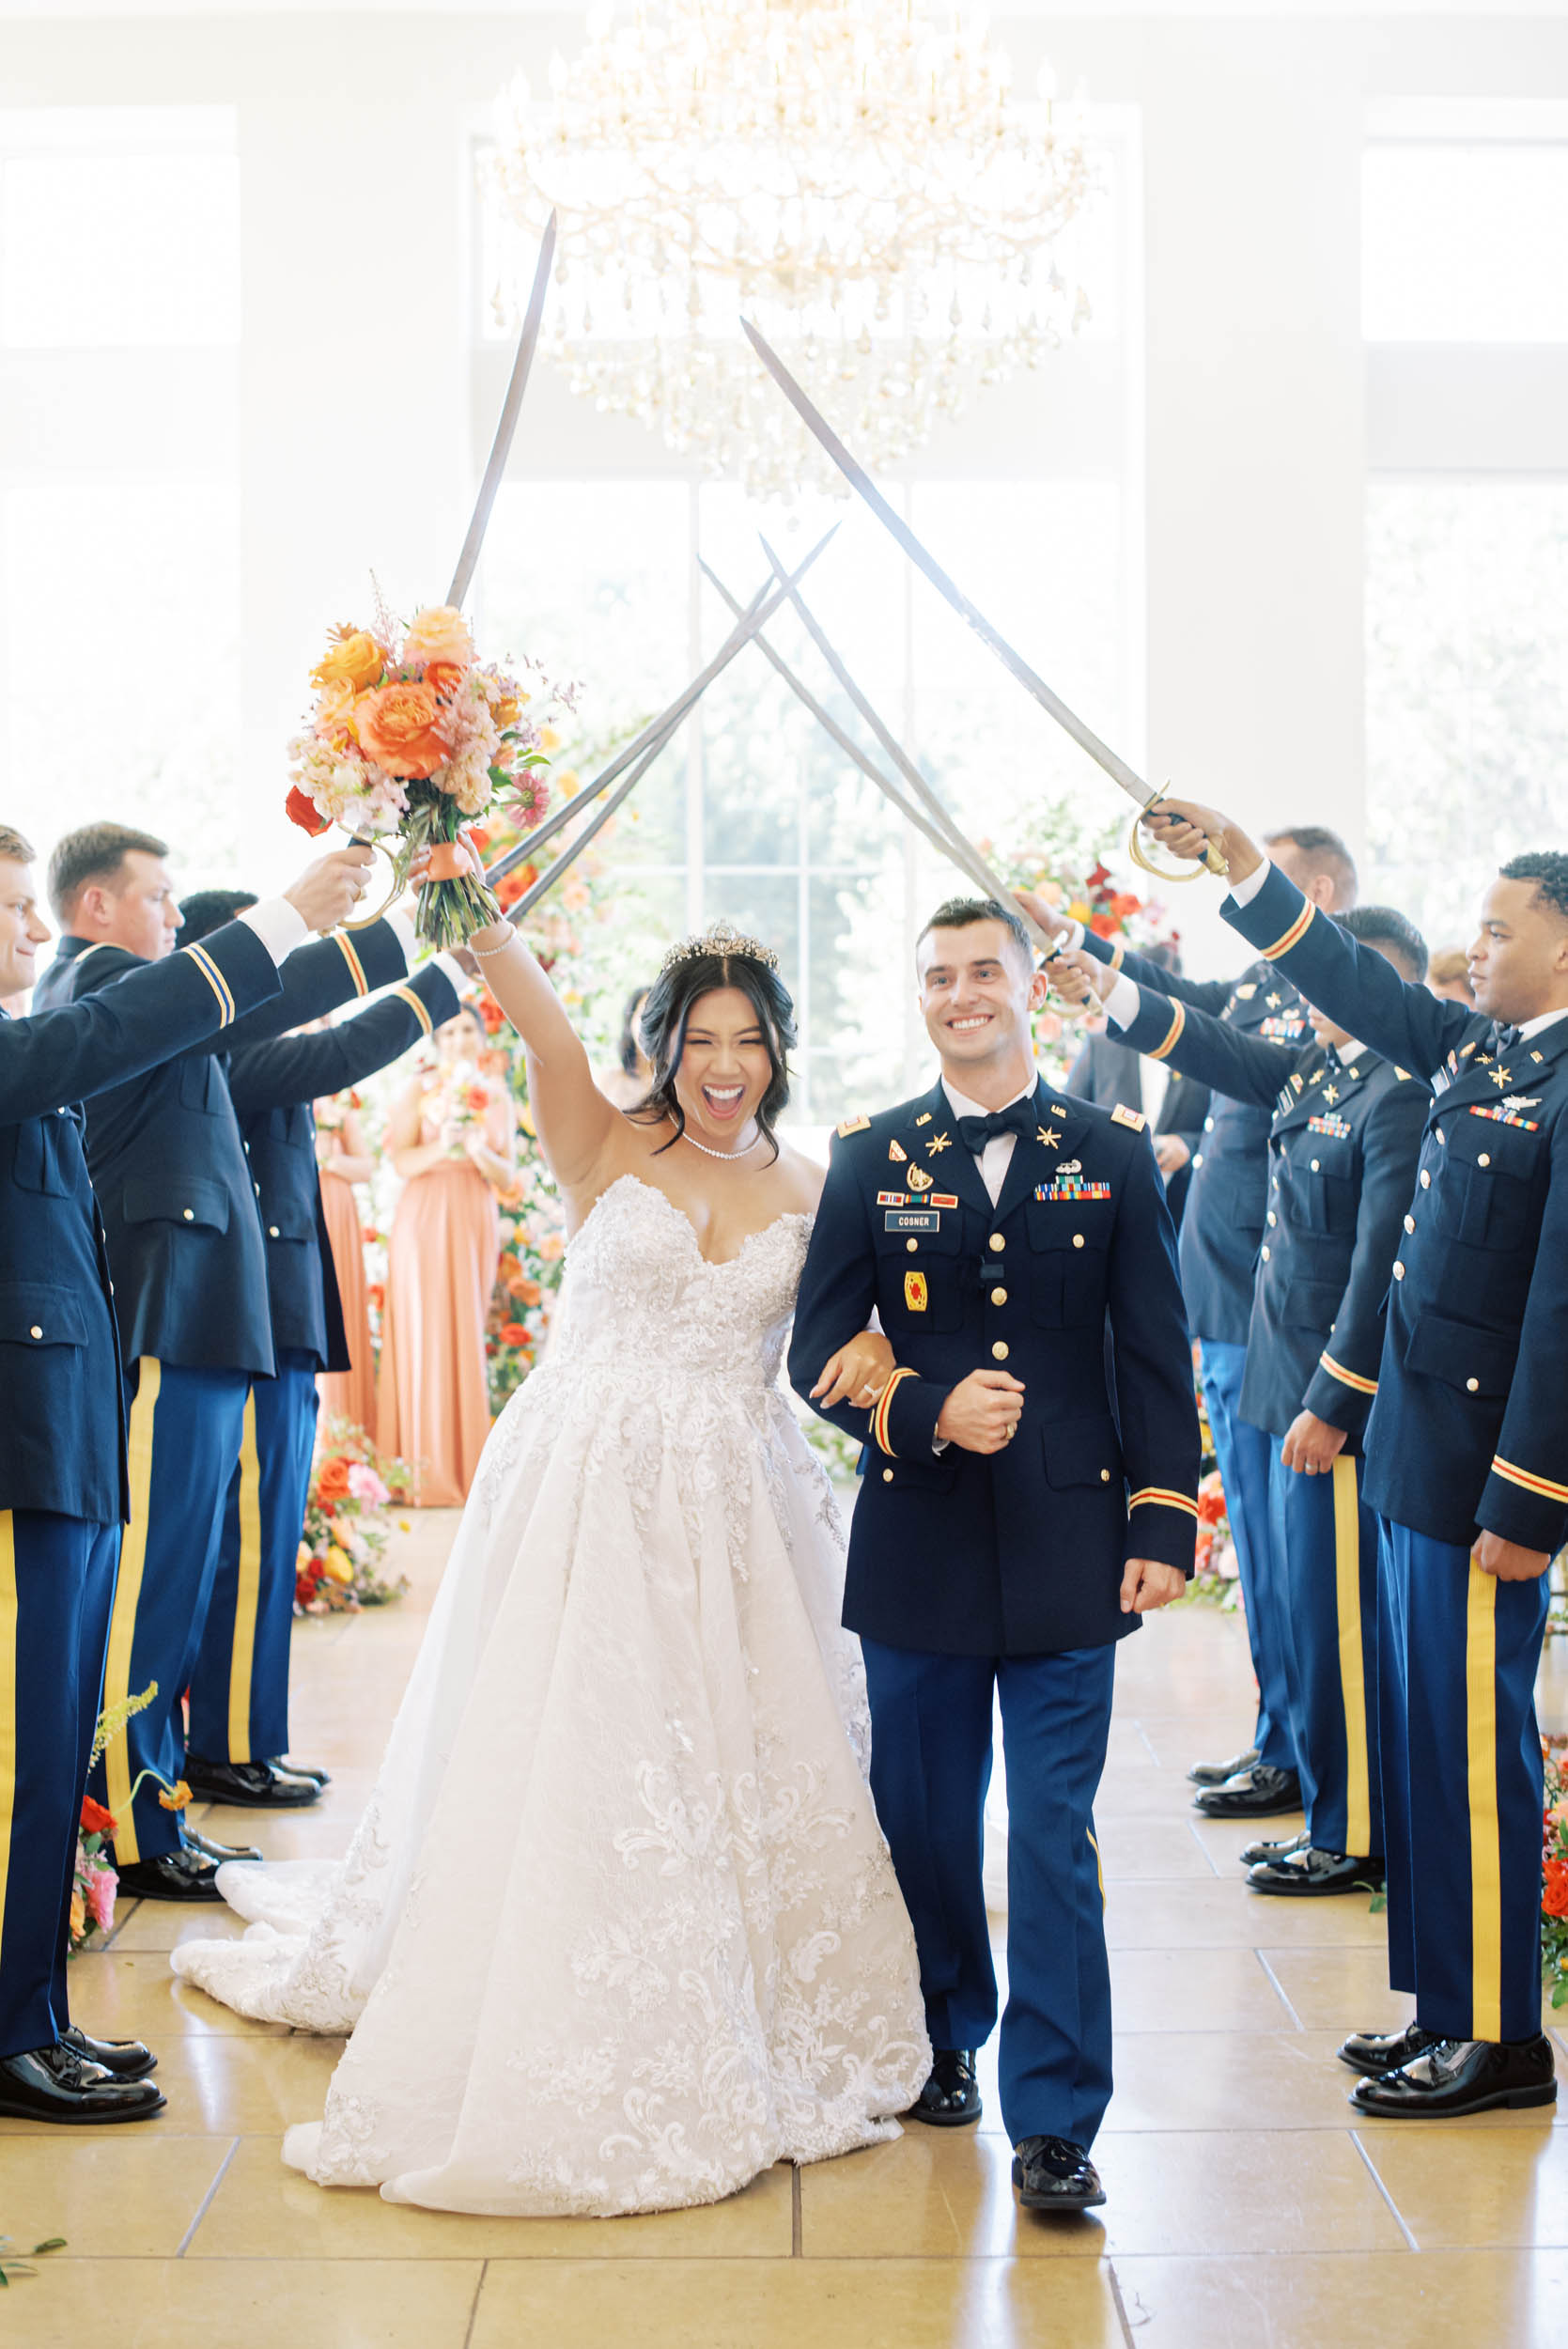 Bride and groom in military uniform walking past marines with swords